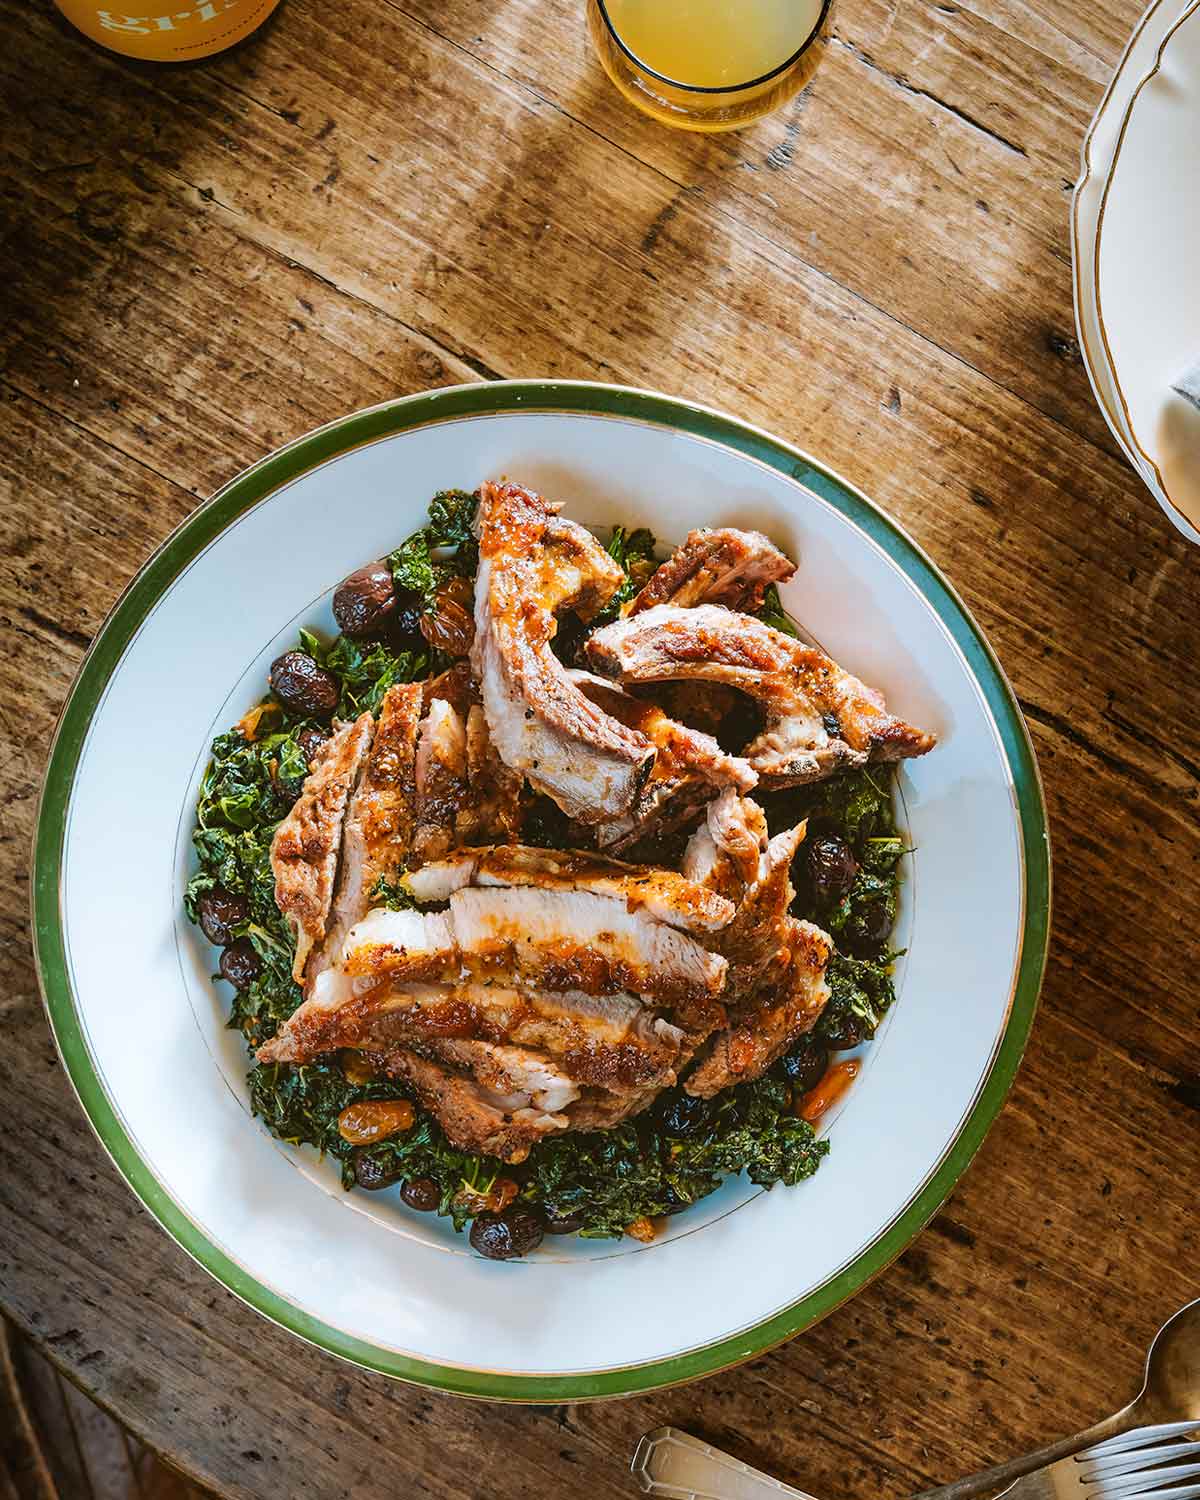 A green and white platter with wilted kale, raisins, olives, and a pile of sliced pork.